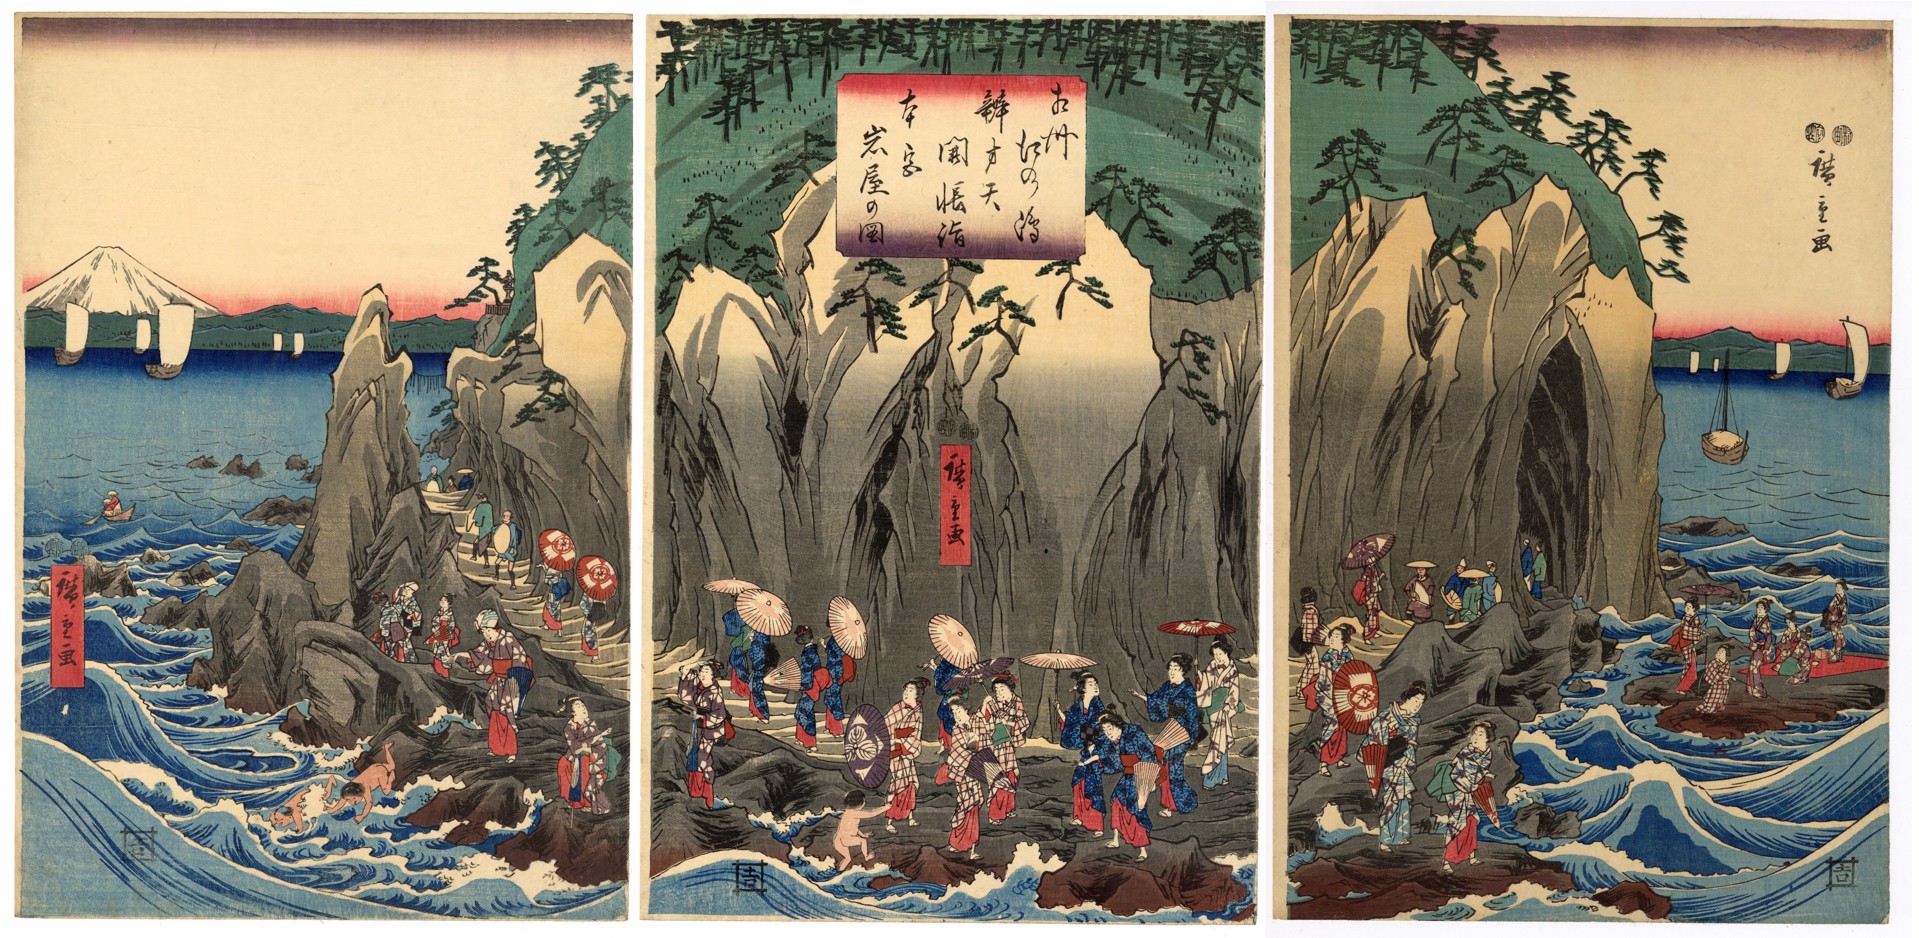 Pilgramage to the Original Shrine of Benten in the Cave at Enoshima, Sagami Province by Hiroshige